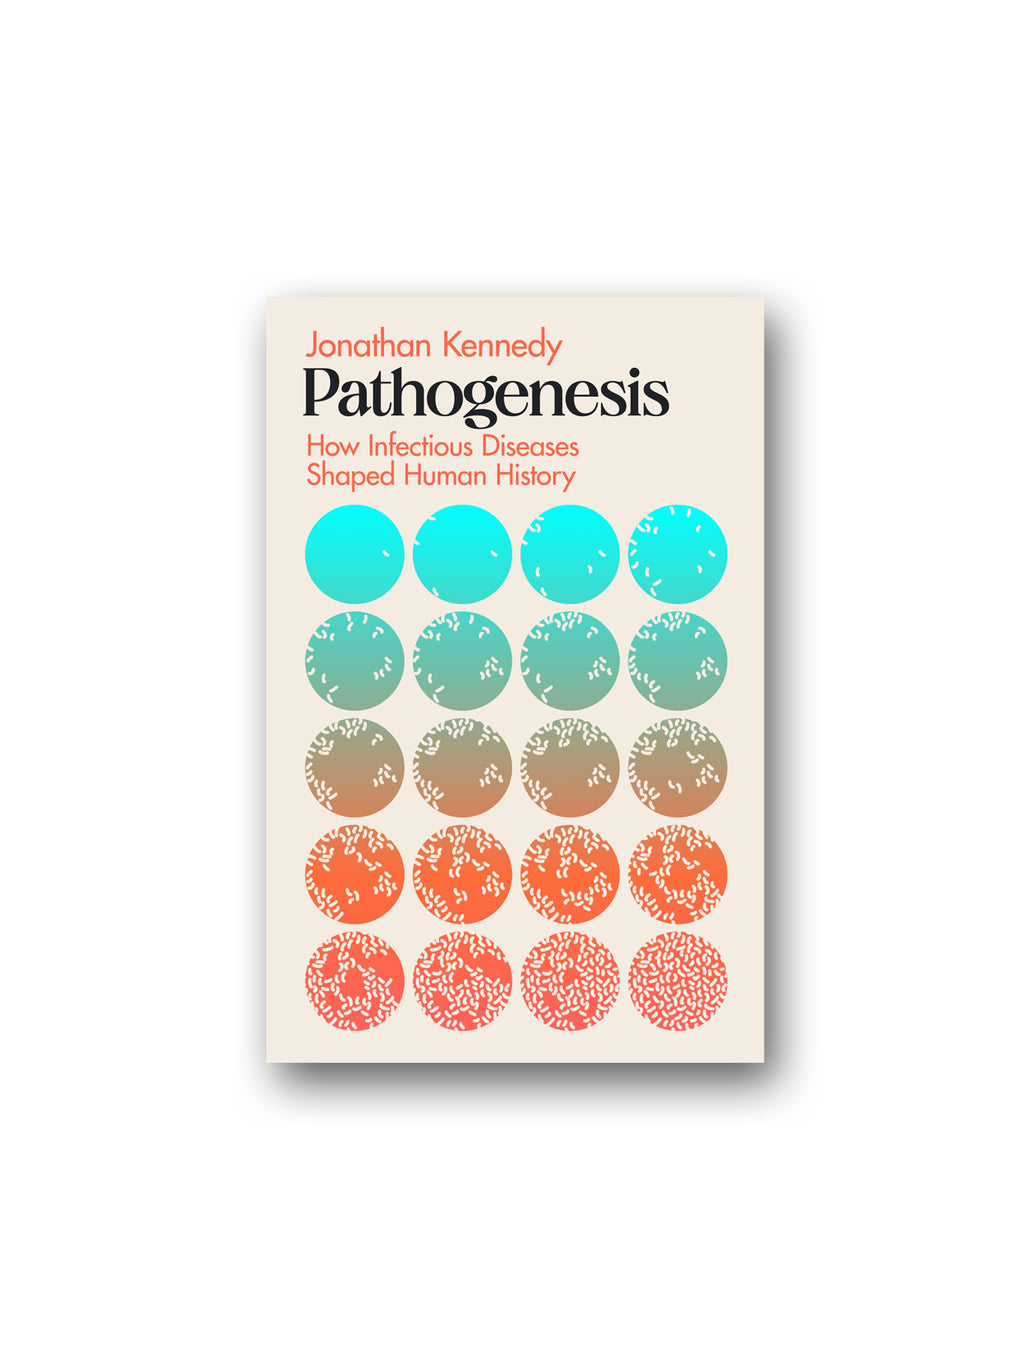 Pathogenesis : How germs made history